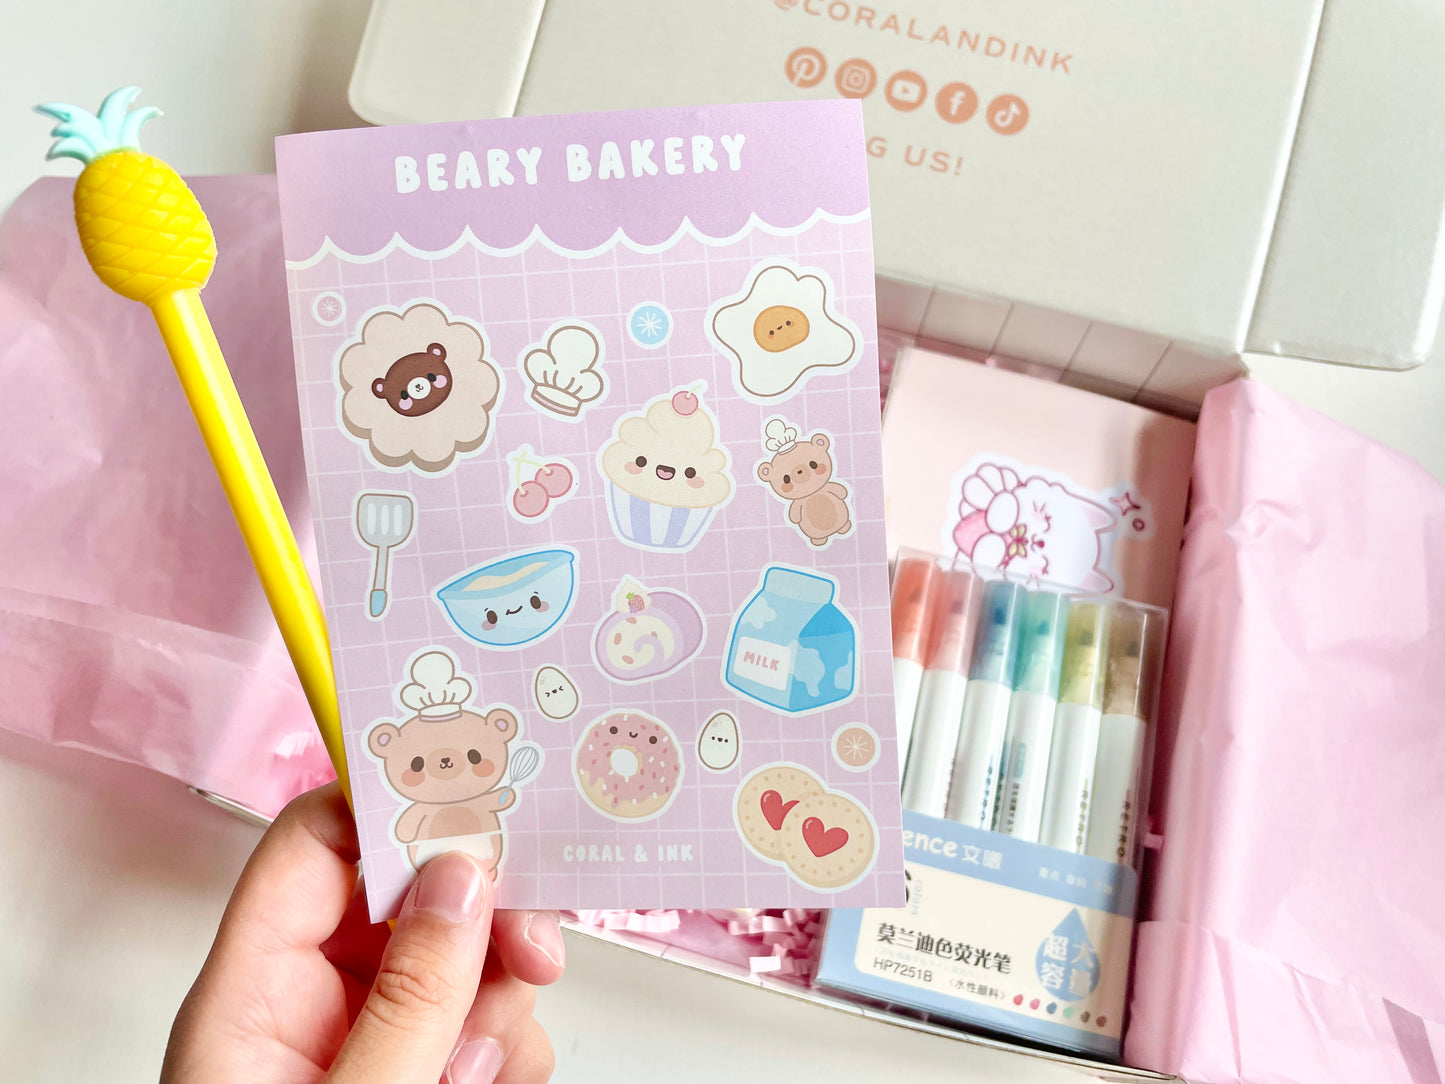 The Happy Mail Stationery Subscription Box